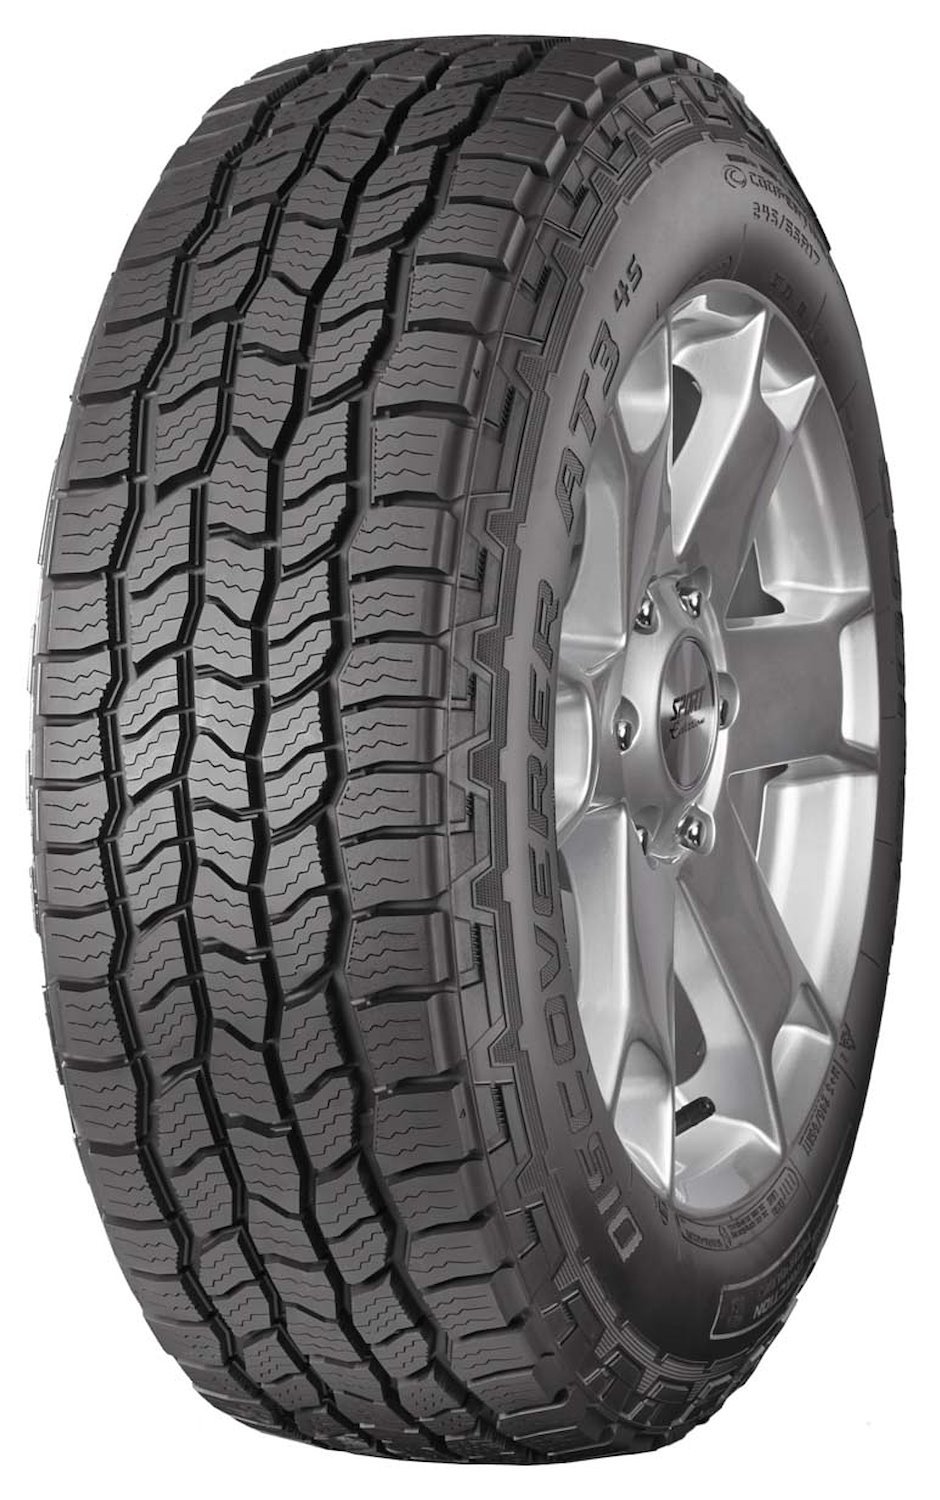 Discoverer AT3 4S All-Terrain Tire, 265/70R16